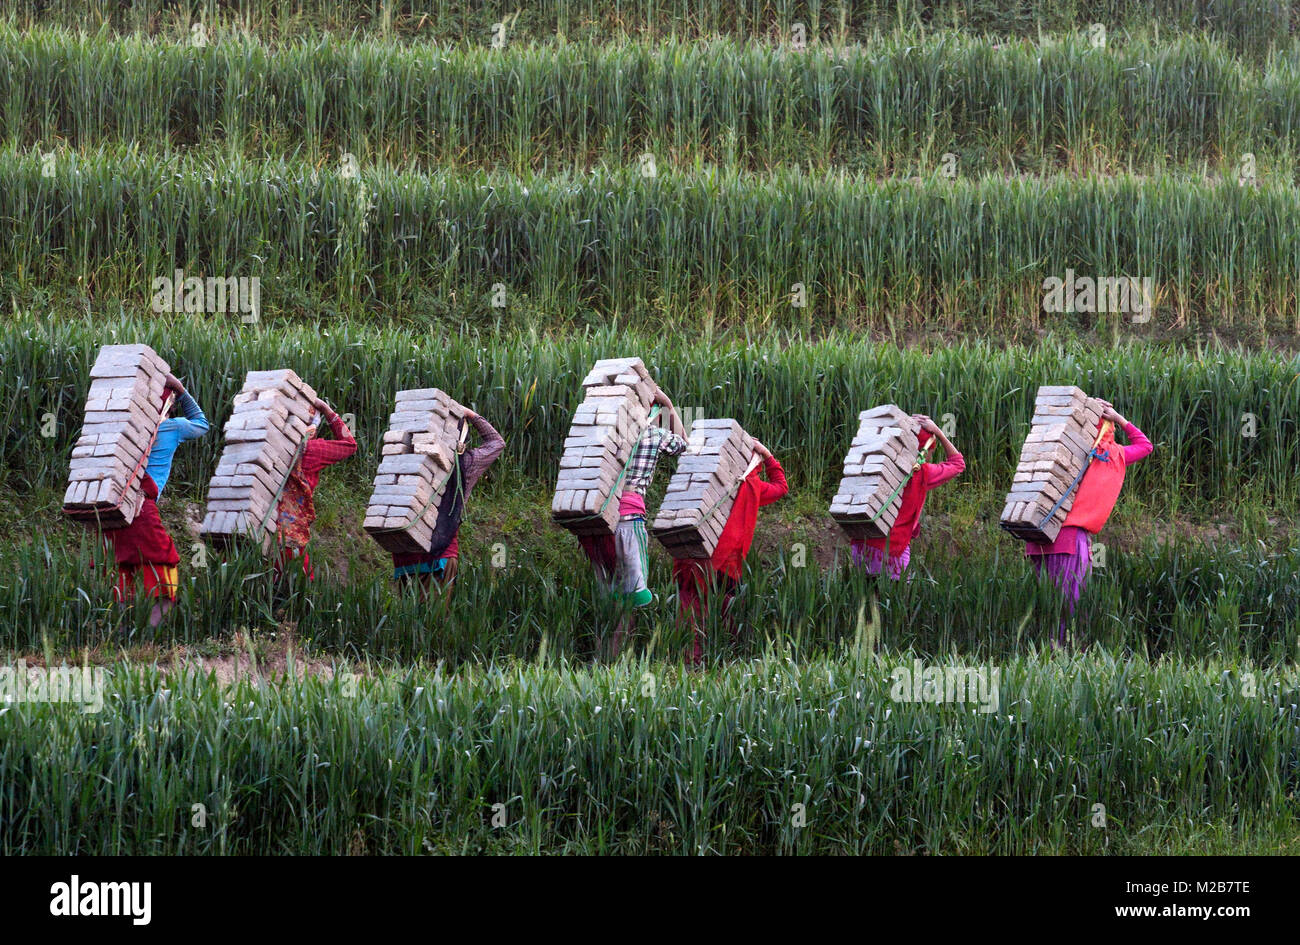 Labors carry mud bricks from the field to the brick kiln for combustion. Stock Photo